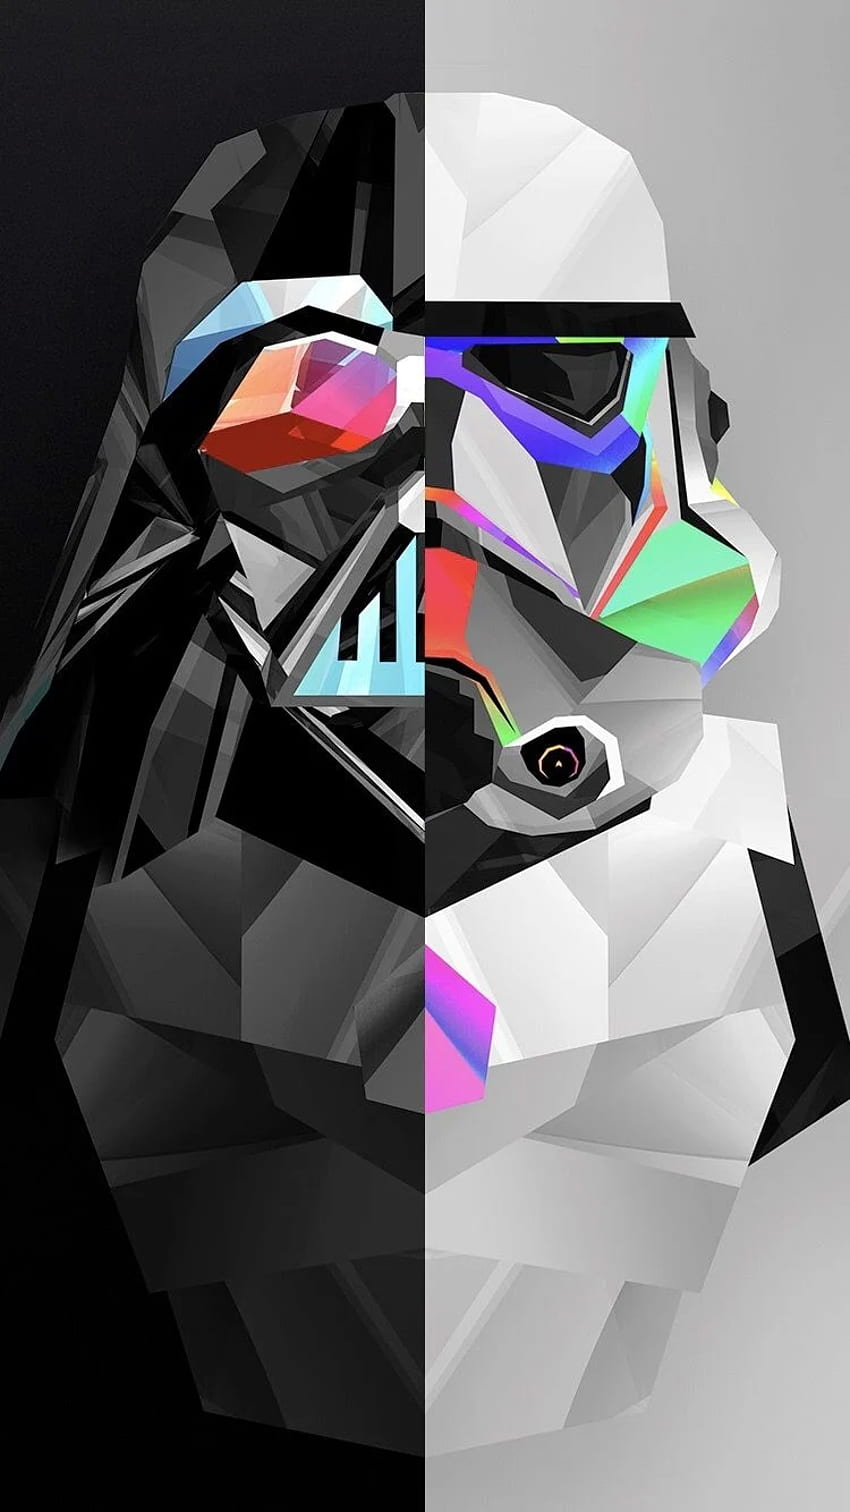 10 Cool Star Wars wallpapers for iPhone in 2023 Free HD download   iGeeksBlog  Star wars background Star wars wallpaper Star wars pictures